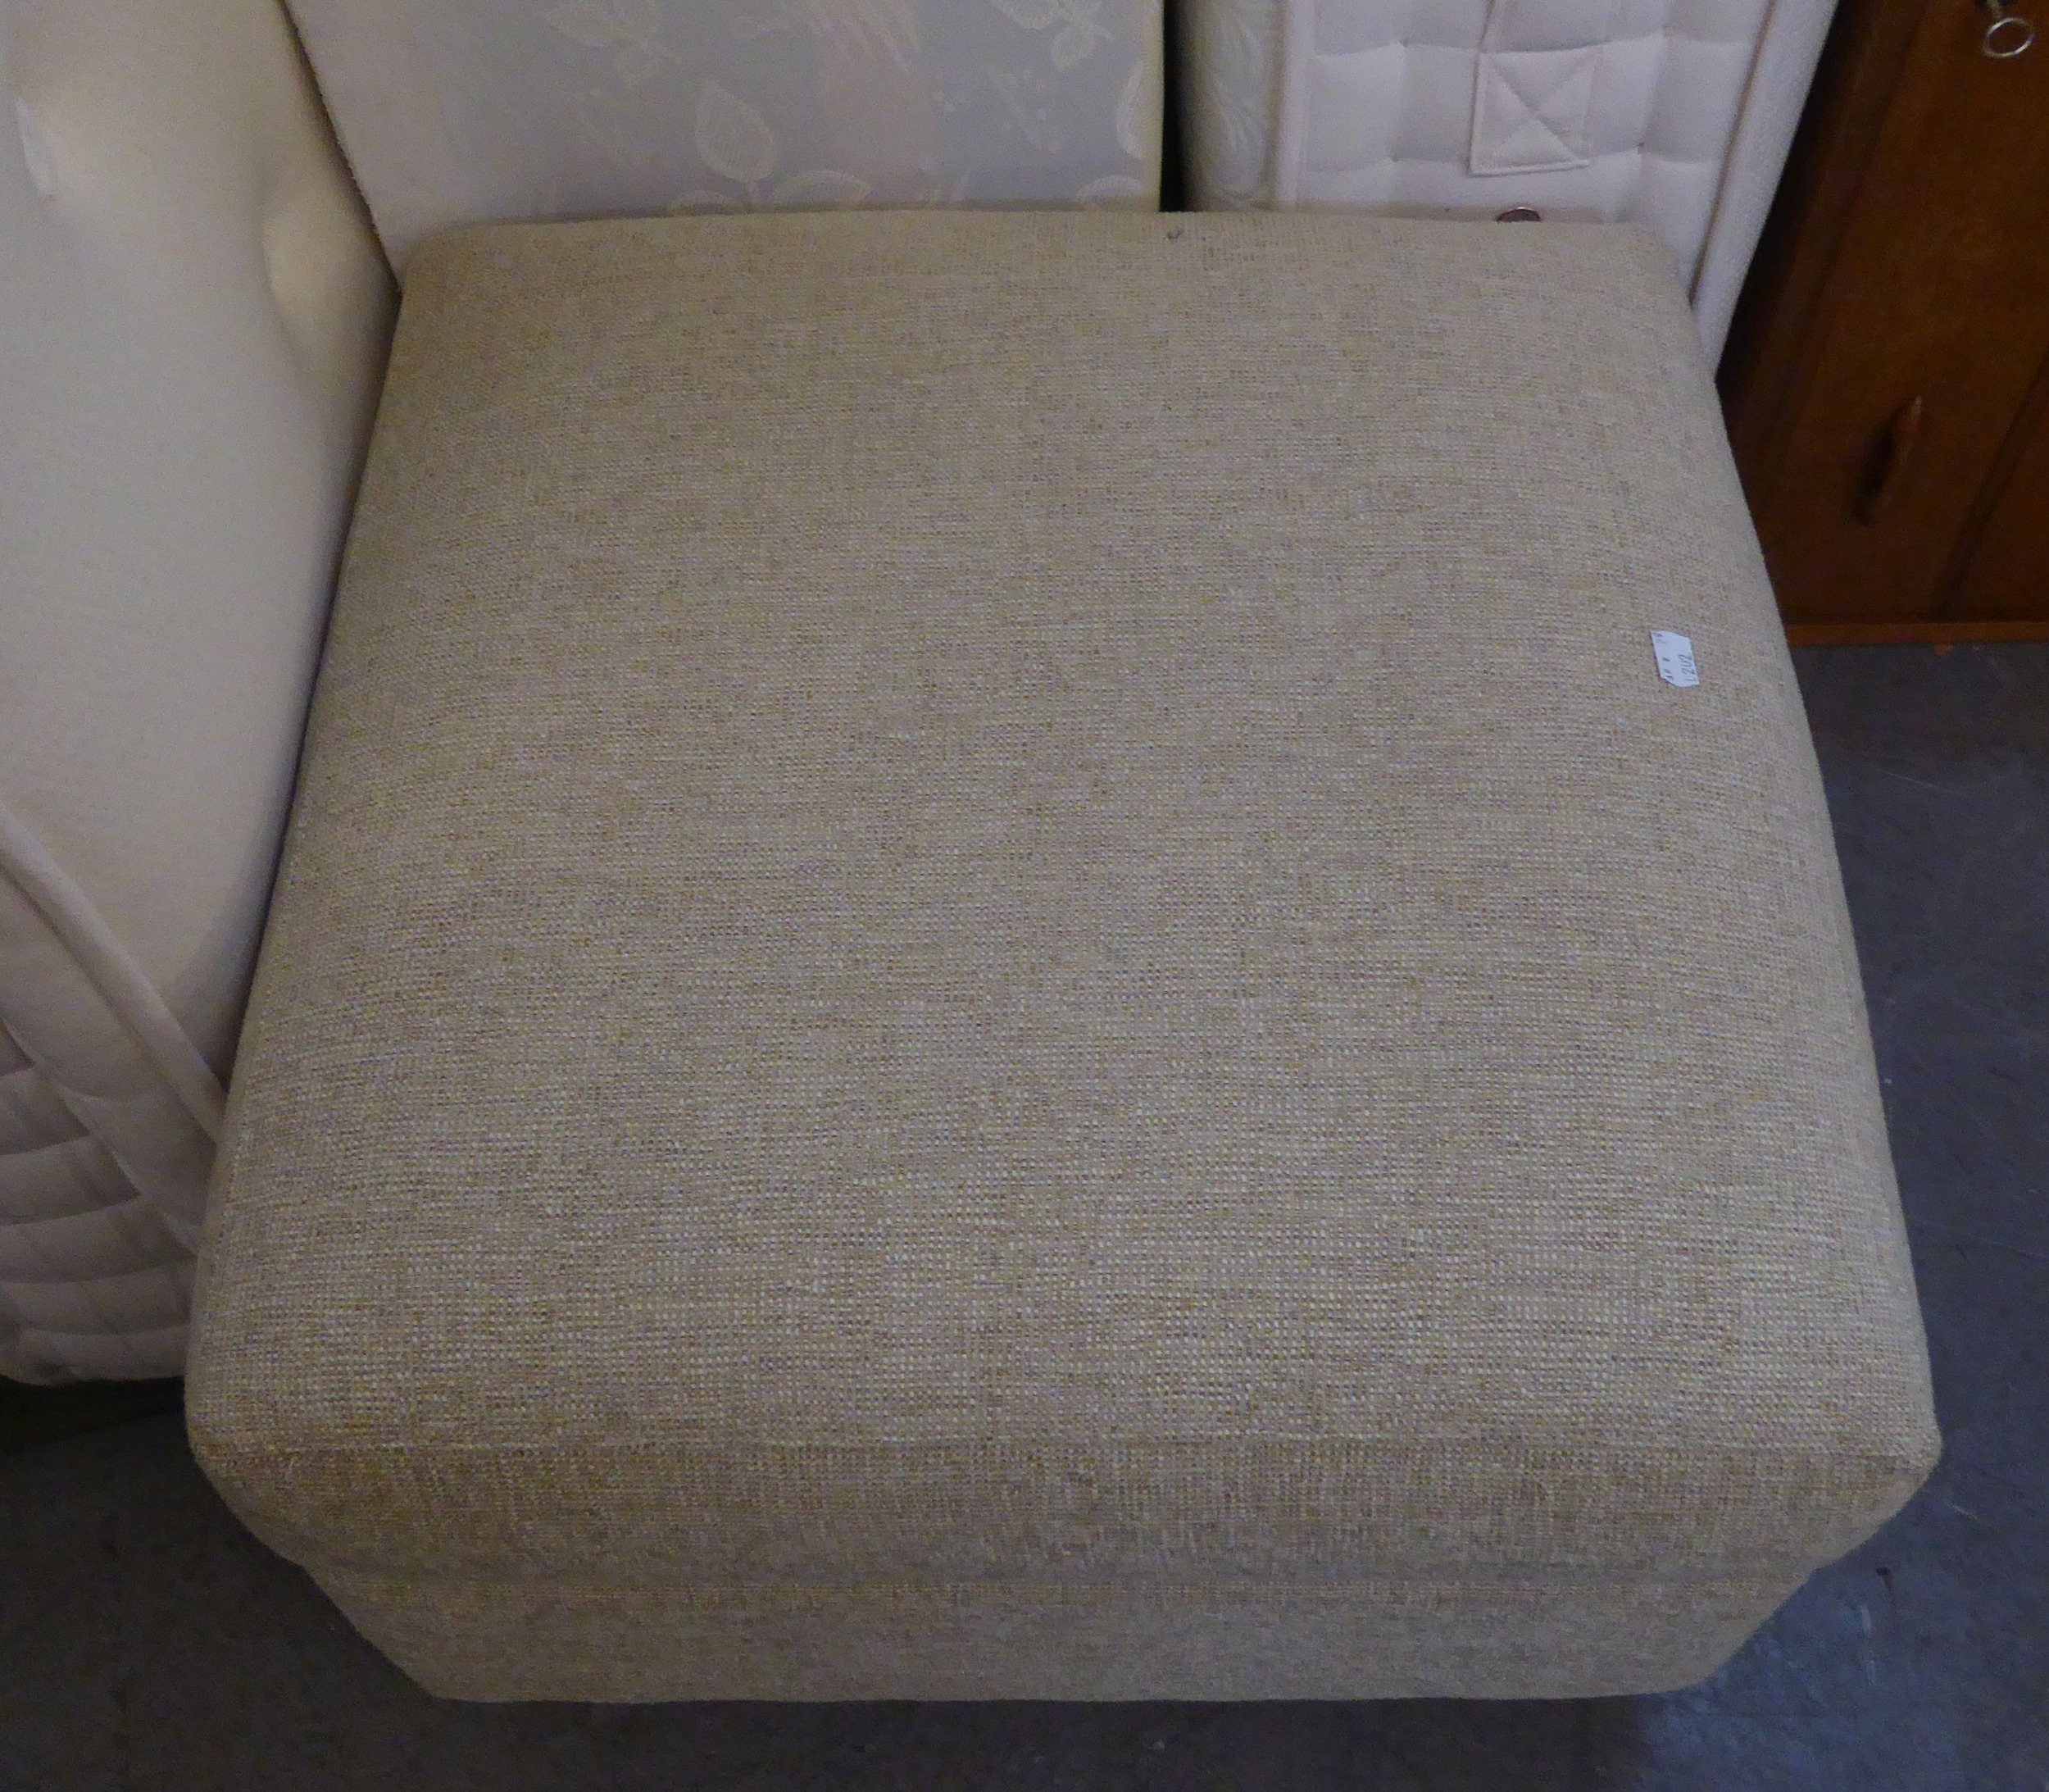 A PAIR OF TWO SEATER SETTEES; A MATCHING ARMCHAIR AND A OTTOMAN SQUARE STOOL, ALL COVERED IN OATMEAL - Image 3 of 3